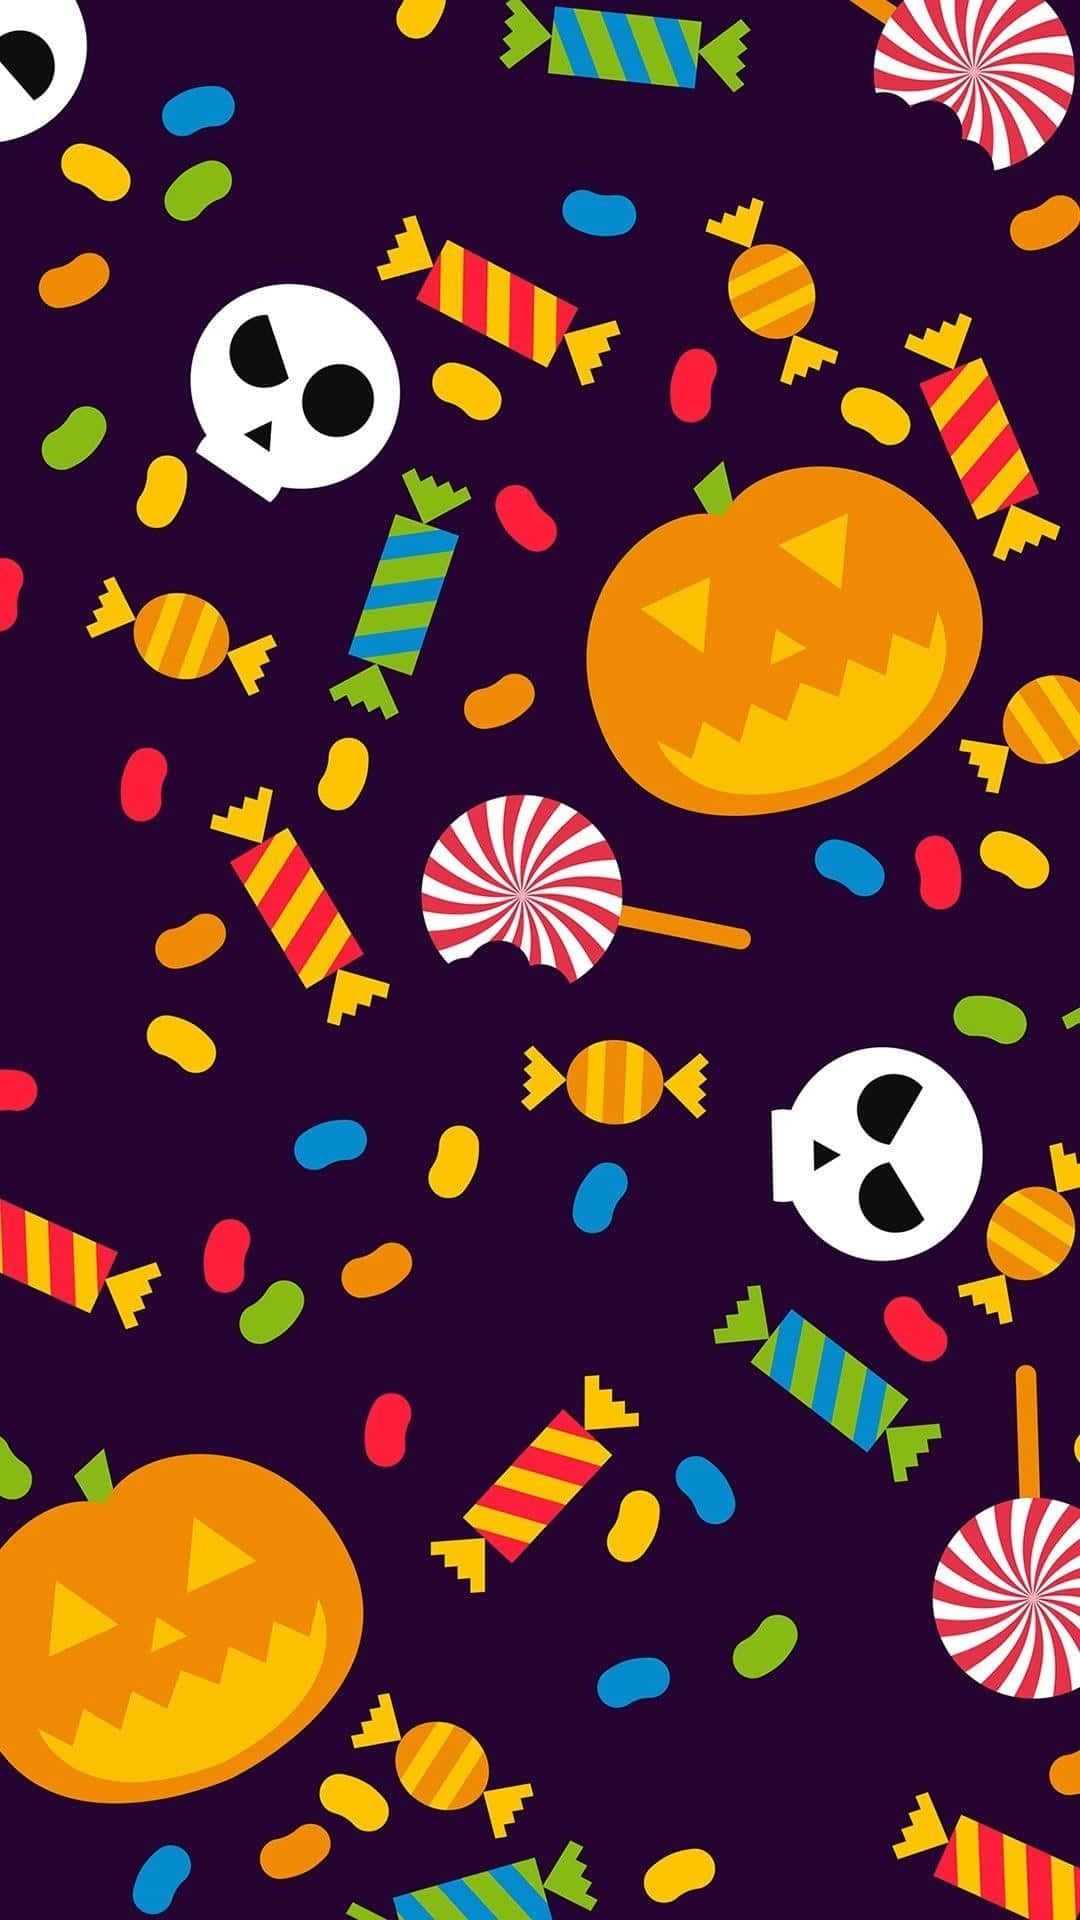 Get festive with fun and spooky Halloween wallpaper for your iPhone!